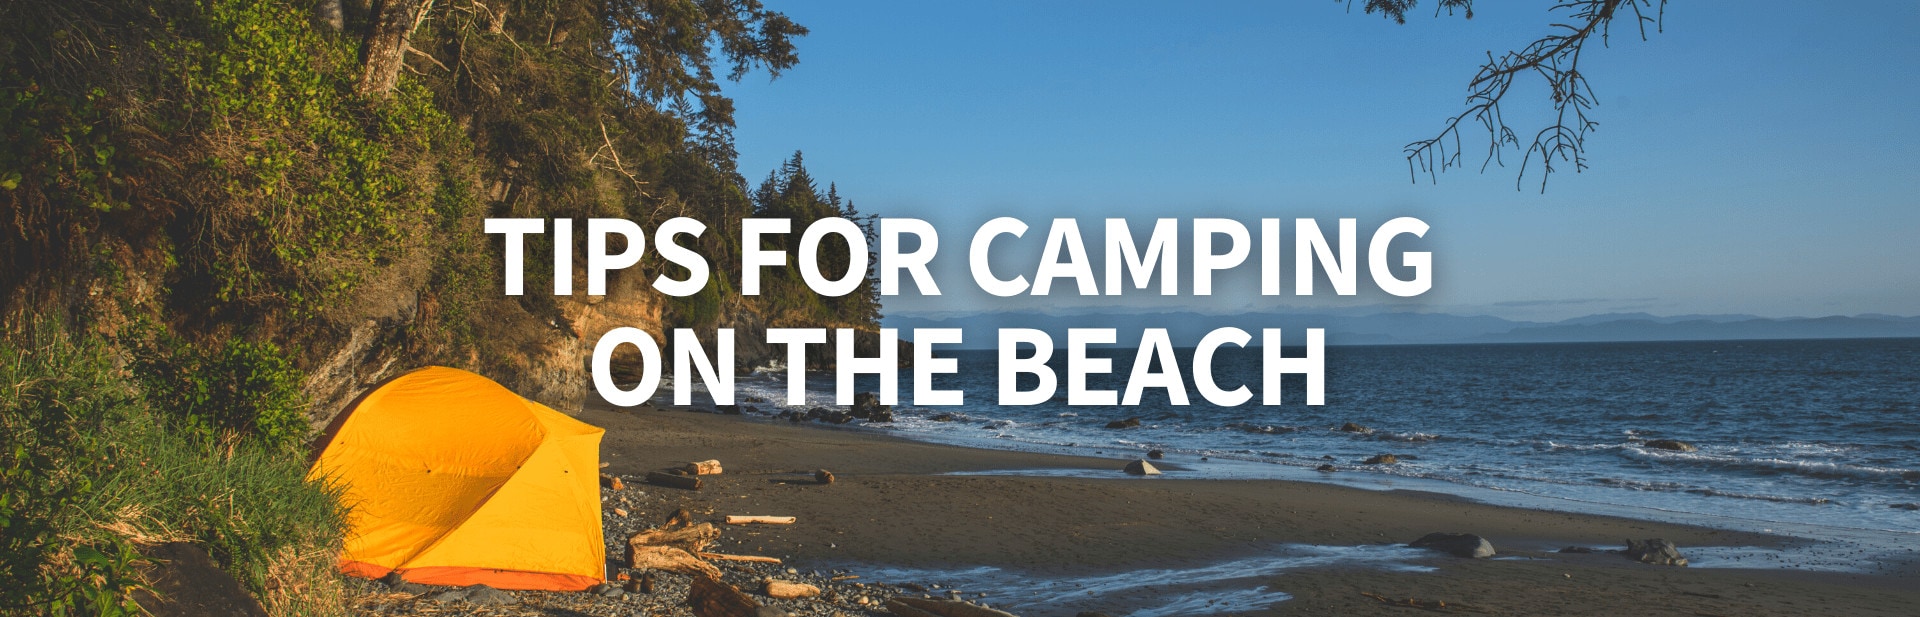 21 Beach Camping Tips and Tricks & Hacks To Have A Wonderful Time